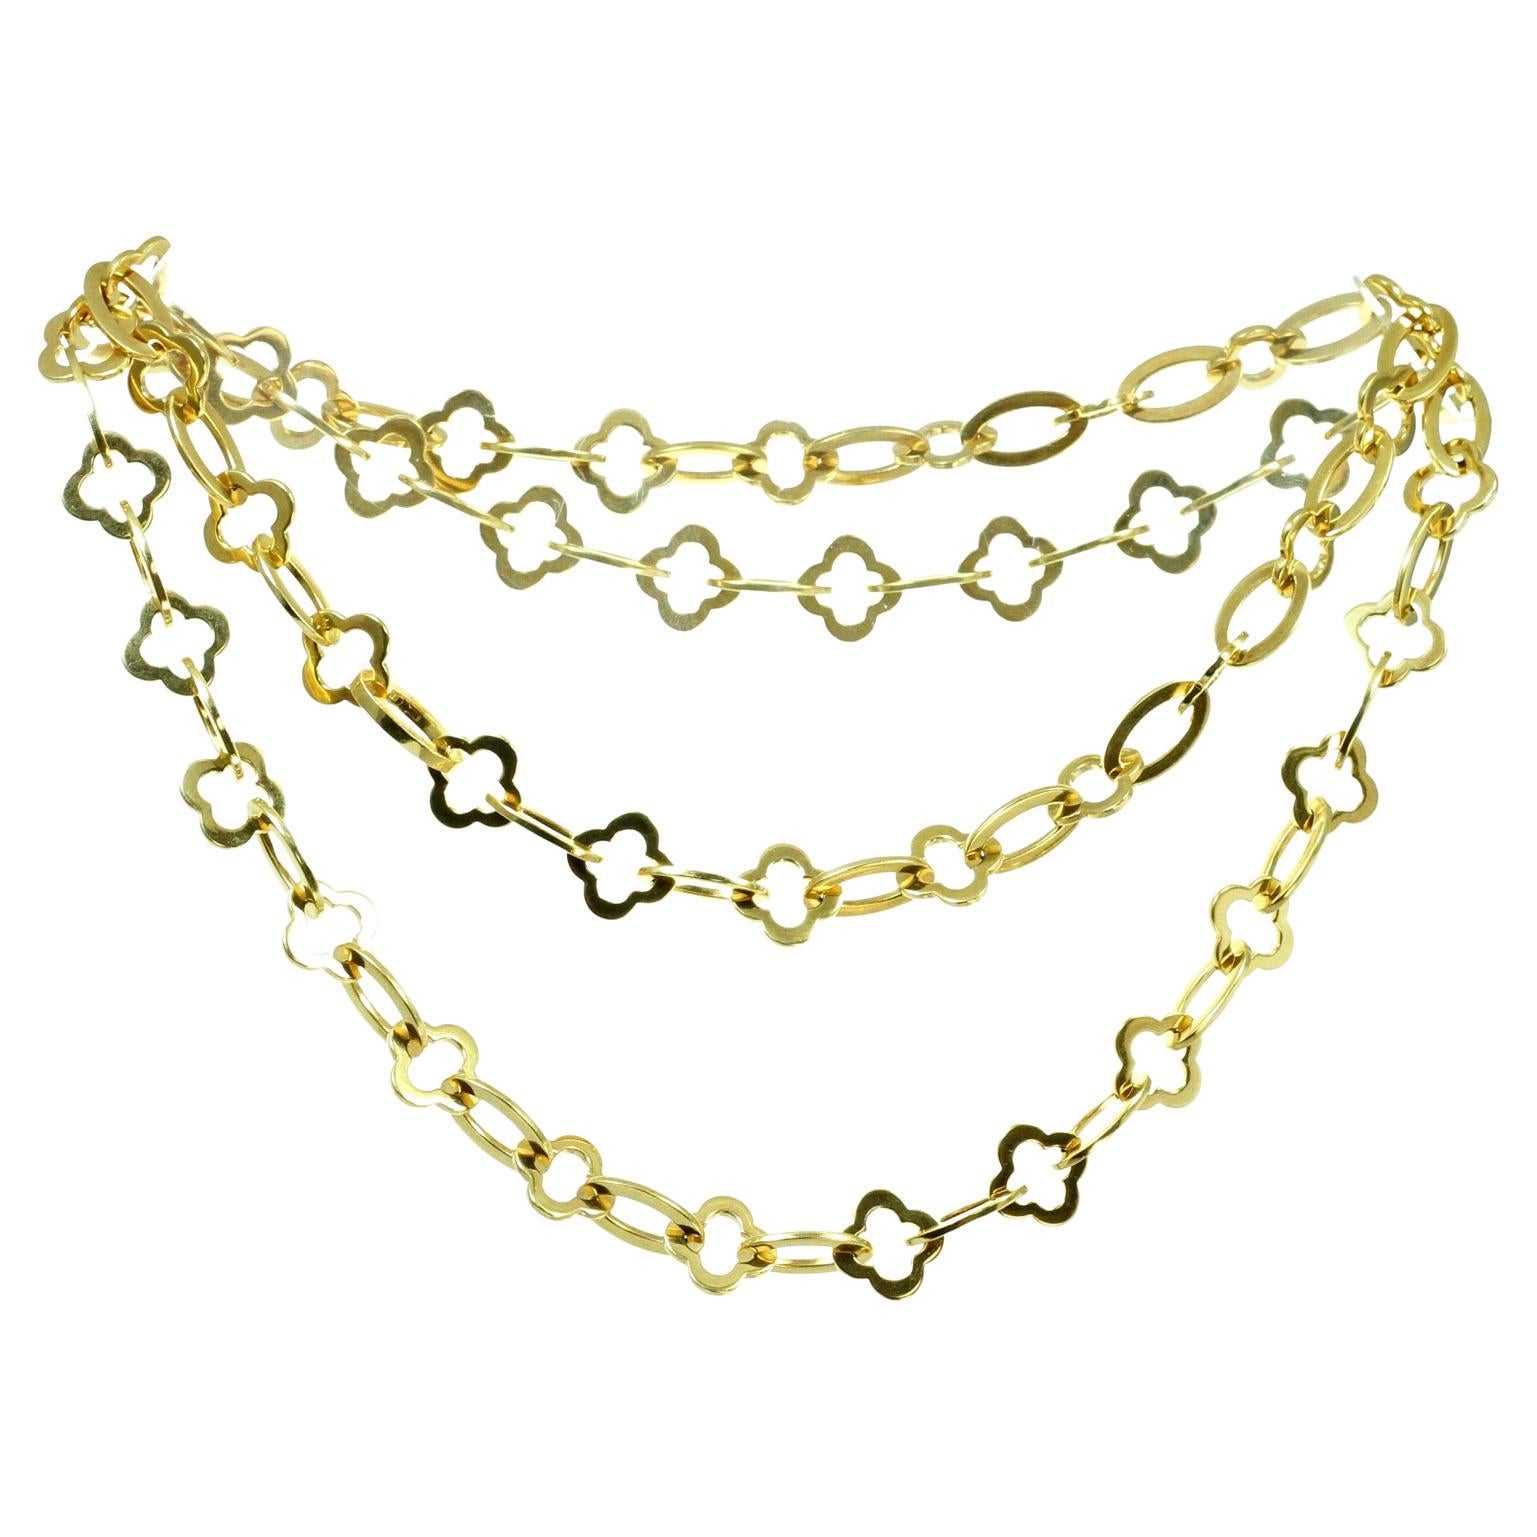 VAN CLEEF & ARPELS Byzantine Alhambra 18k Yellow Gold Long Chain Necklace For Sale